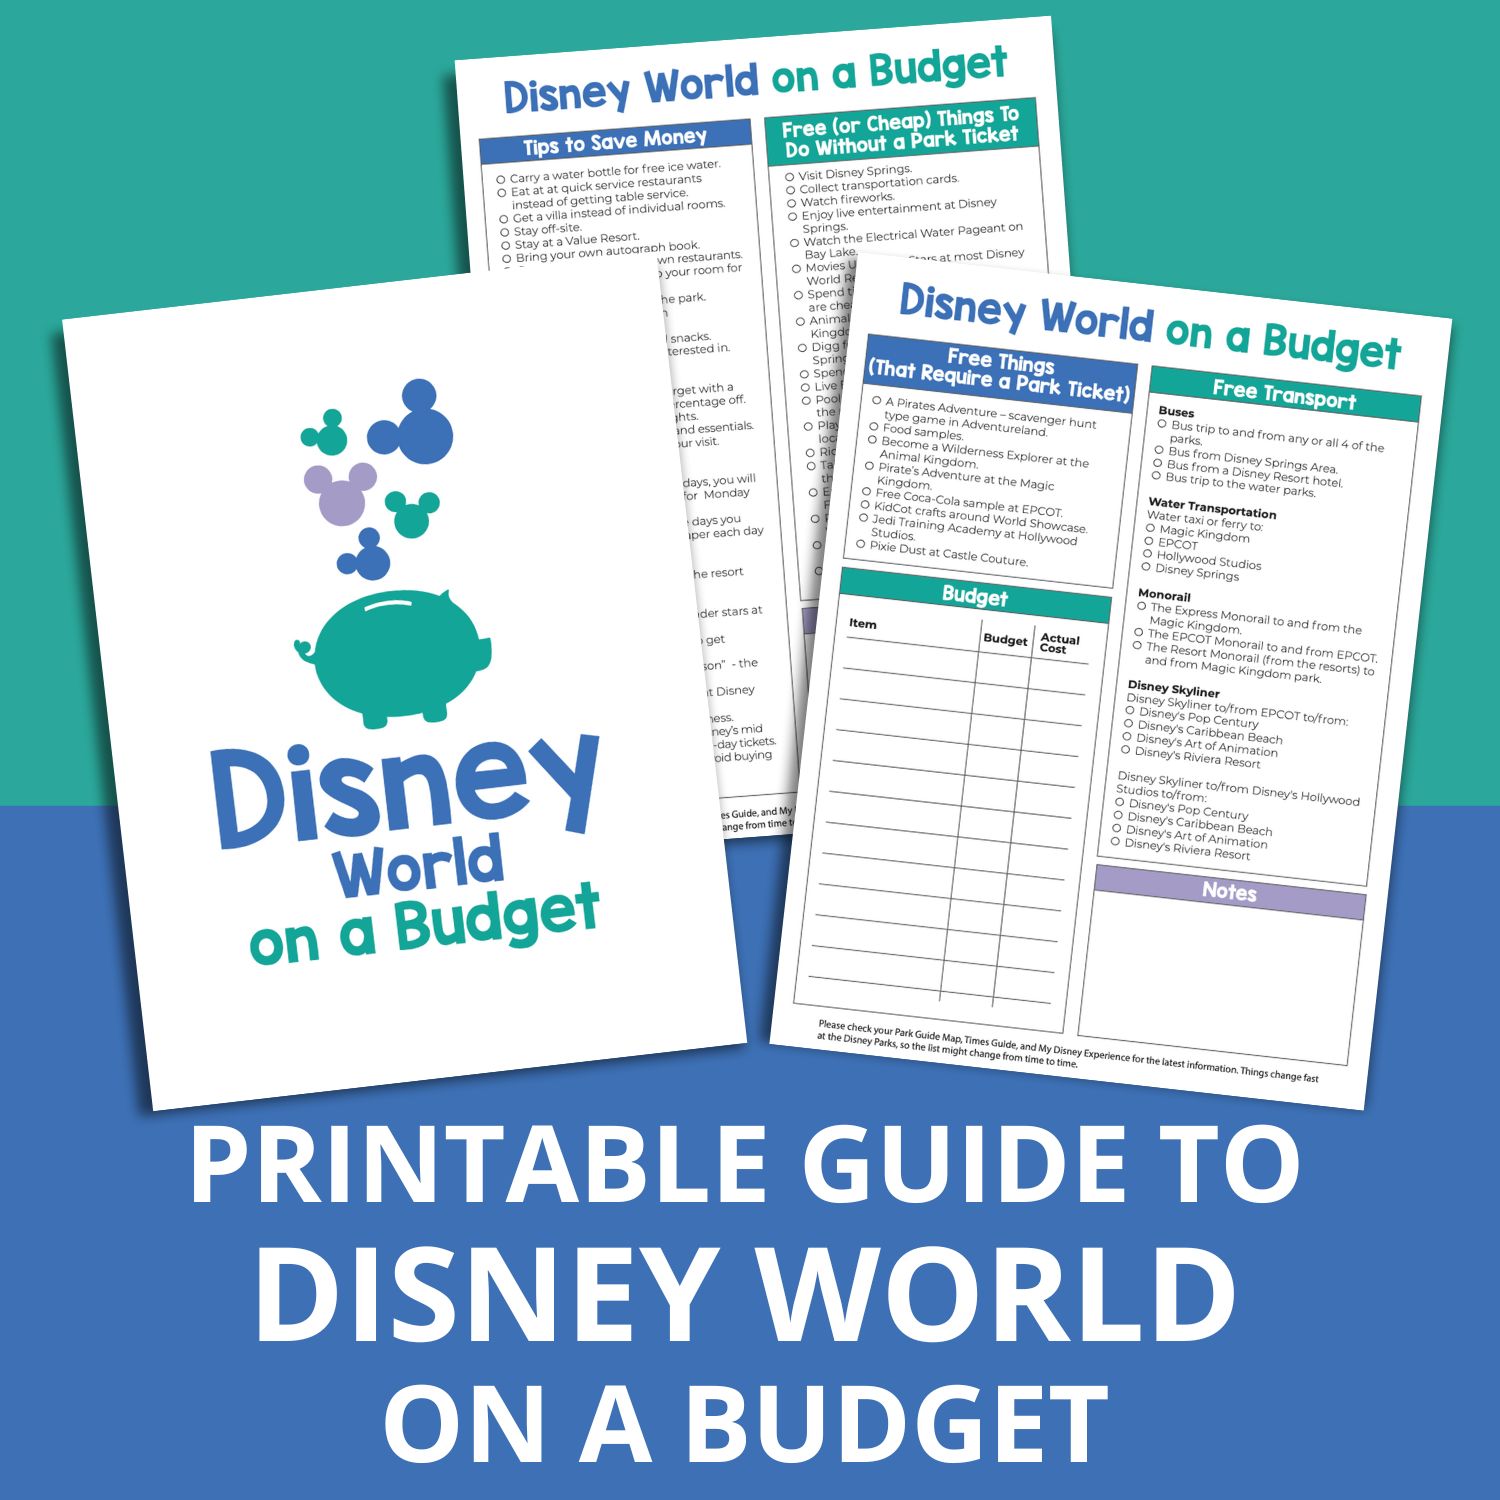 mockup of free printable guide to Disney World on a budget